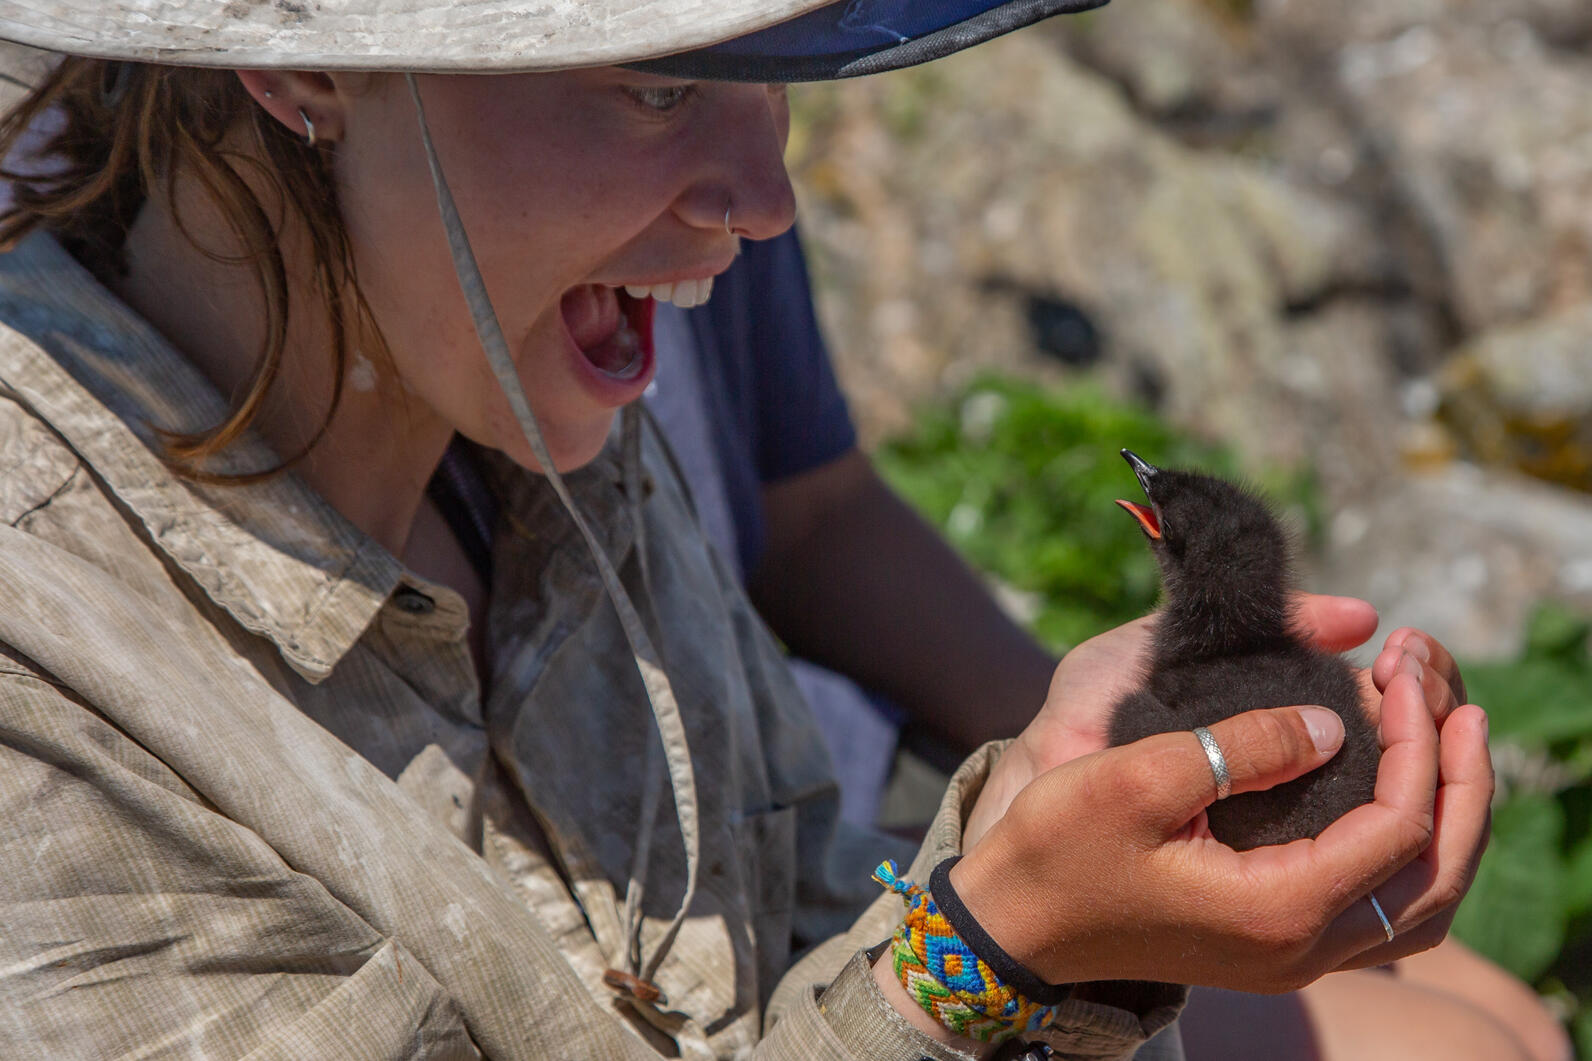 EER Researcher and Chick Find Joy